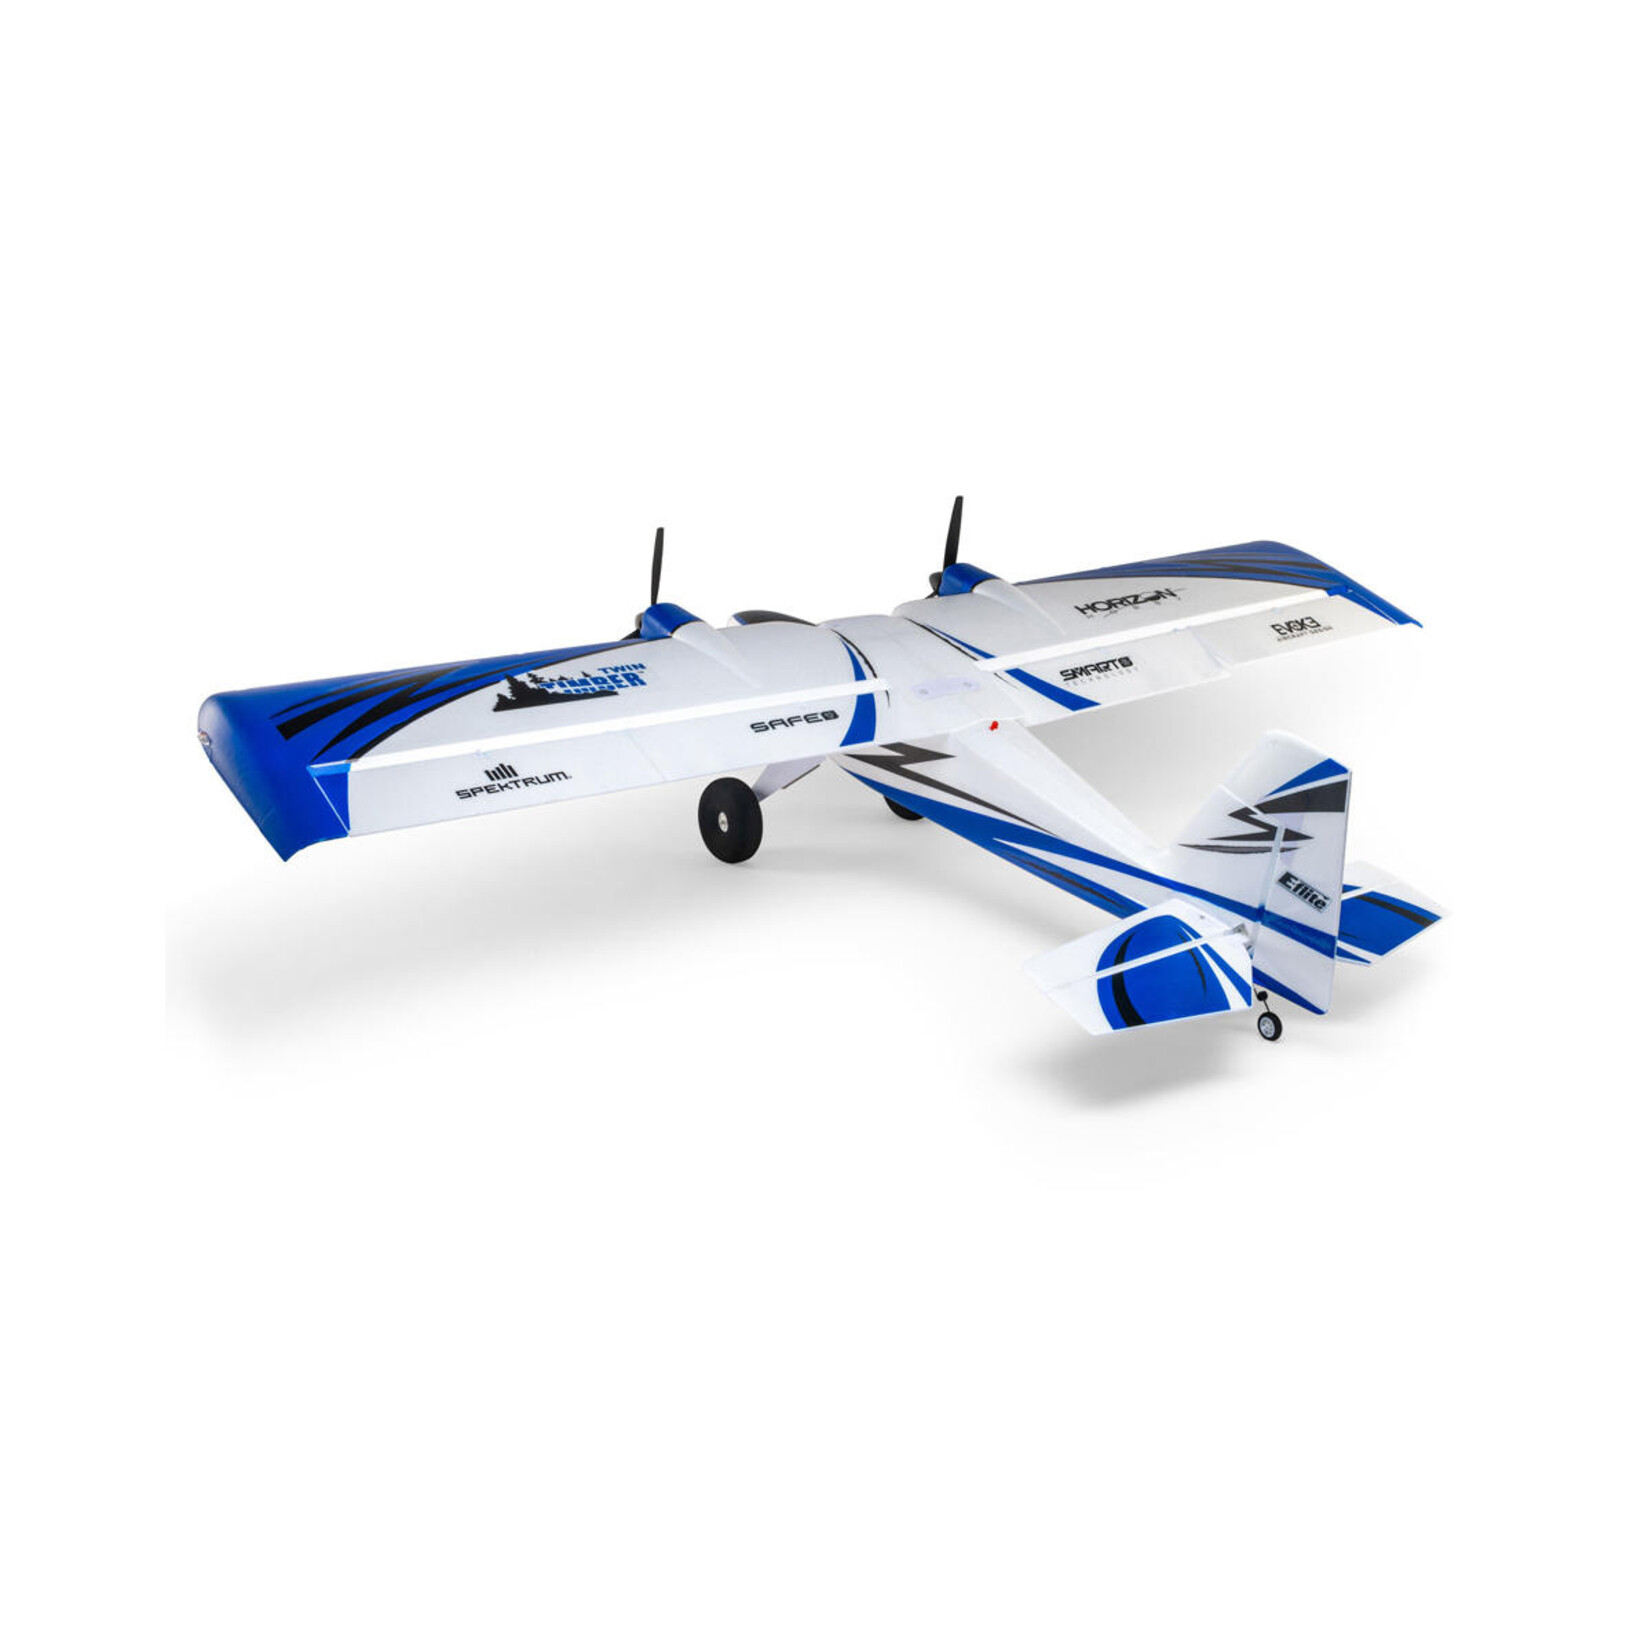 E-flite E-flite Twin Timber 1.6m BNF Basic Electric Airplane w/AS3X & Safe Select #EFL23850